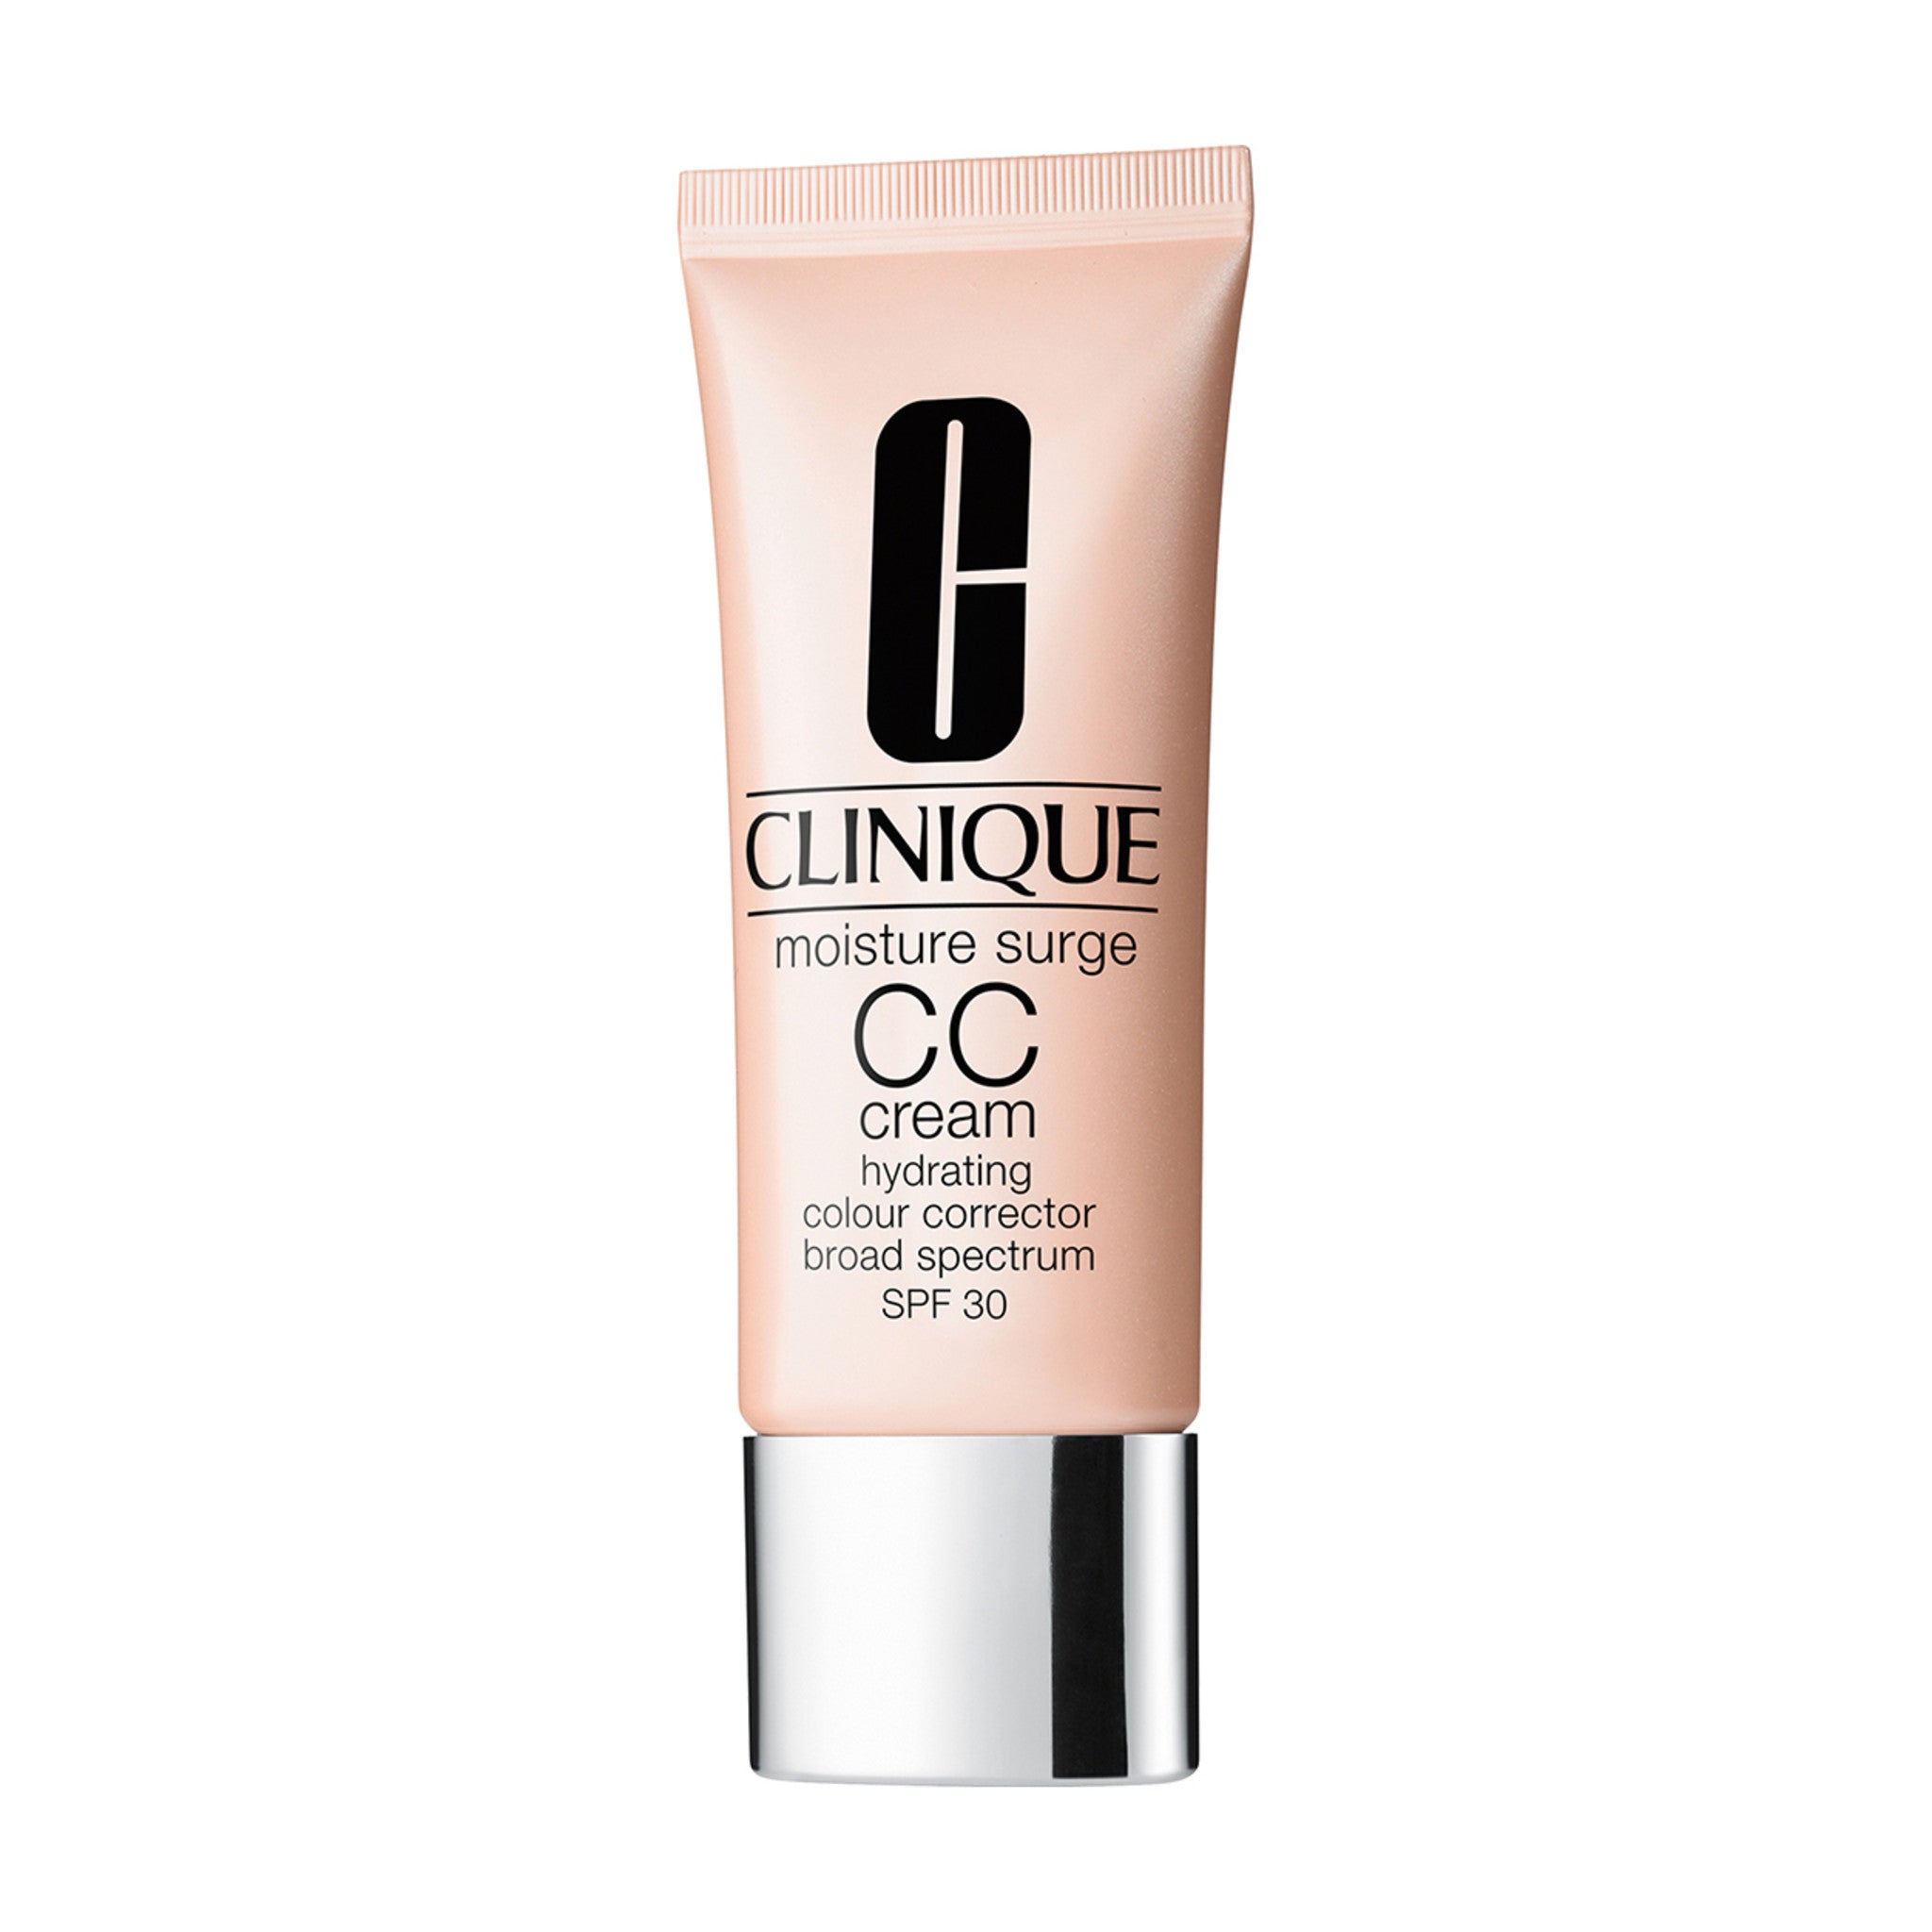 Just in case you missed Clinique Simply Radiant Skincare & Makeup